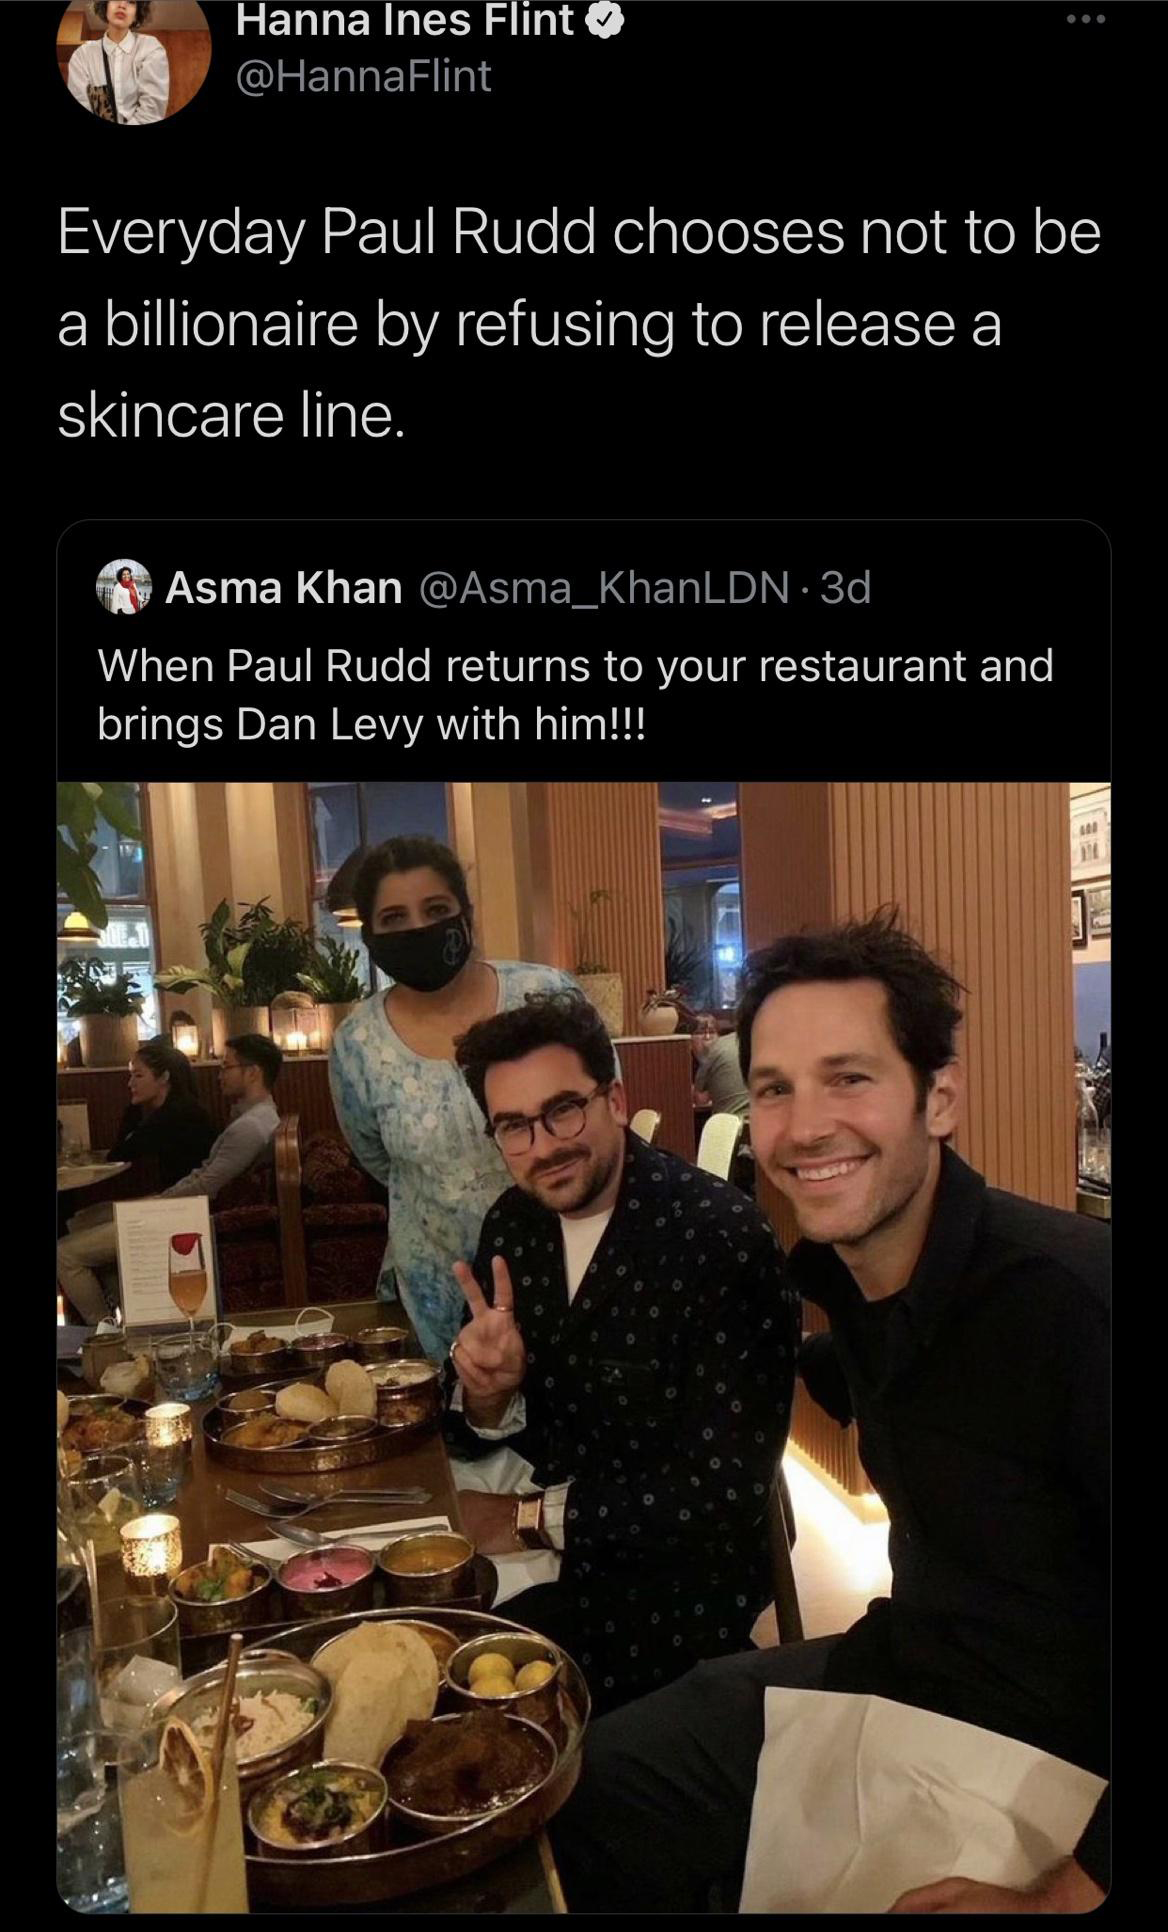 Dan Levy - Hanna Ines Flint Everyday Paul Rudd chooses not to be a billionaire by refusing to release a skincare line. Asma Khan 3d When Paul Rudd returns to your restaurant and brings Dan Levy with him!!!